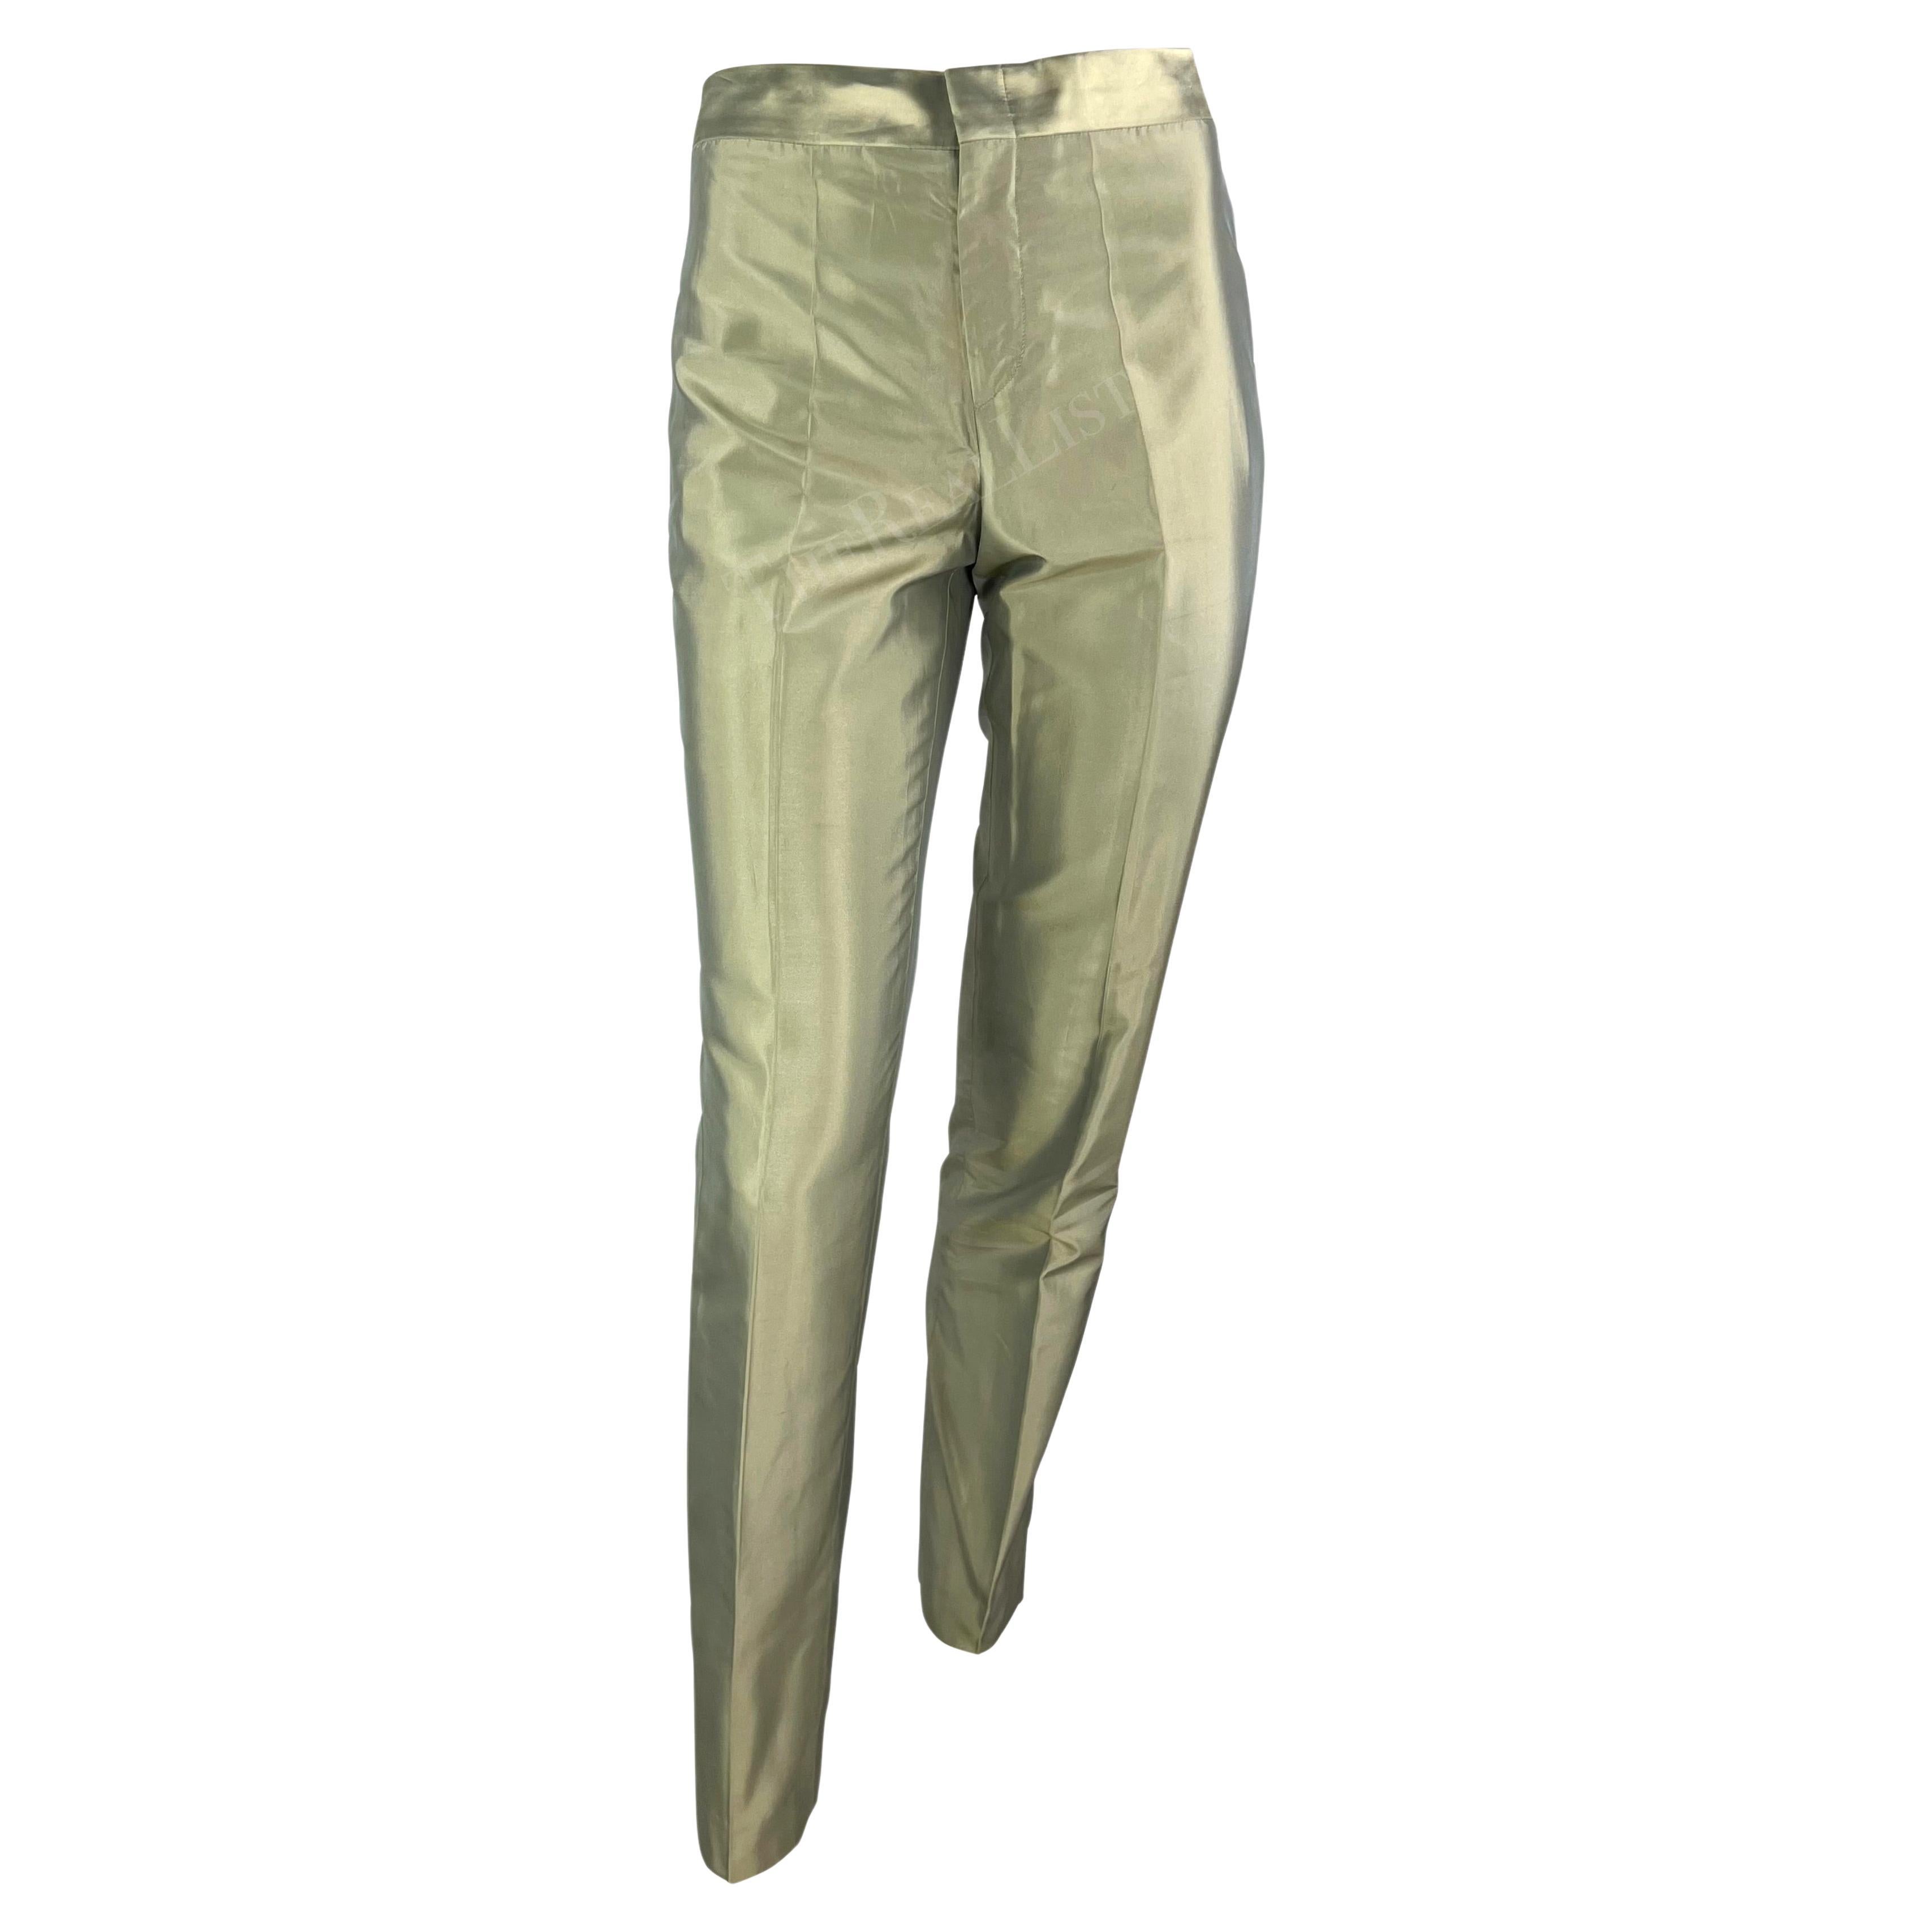 S/S 2000 Gucci by Tom Ford Light Green Iridescent Silk Straight Leg Pants For Sale